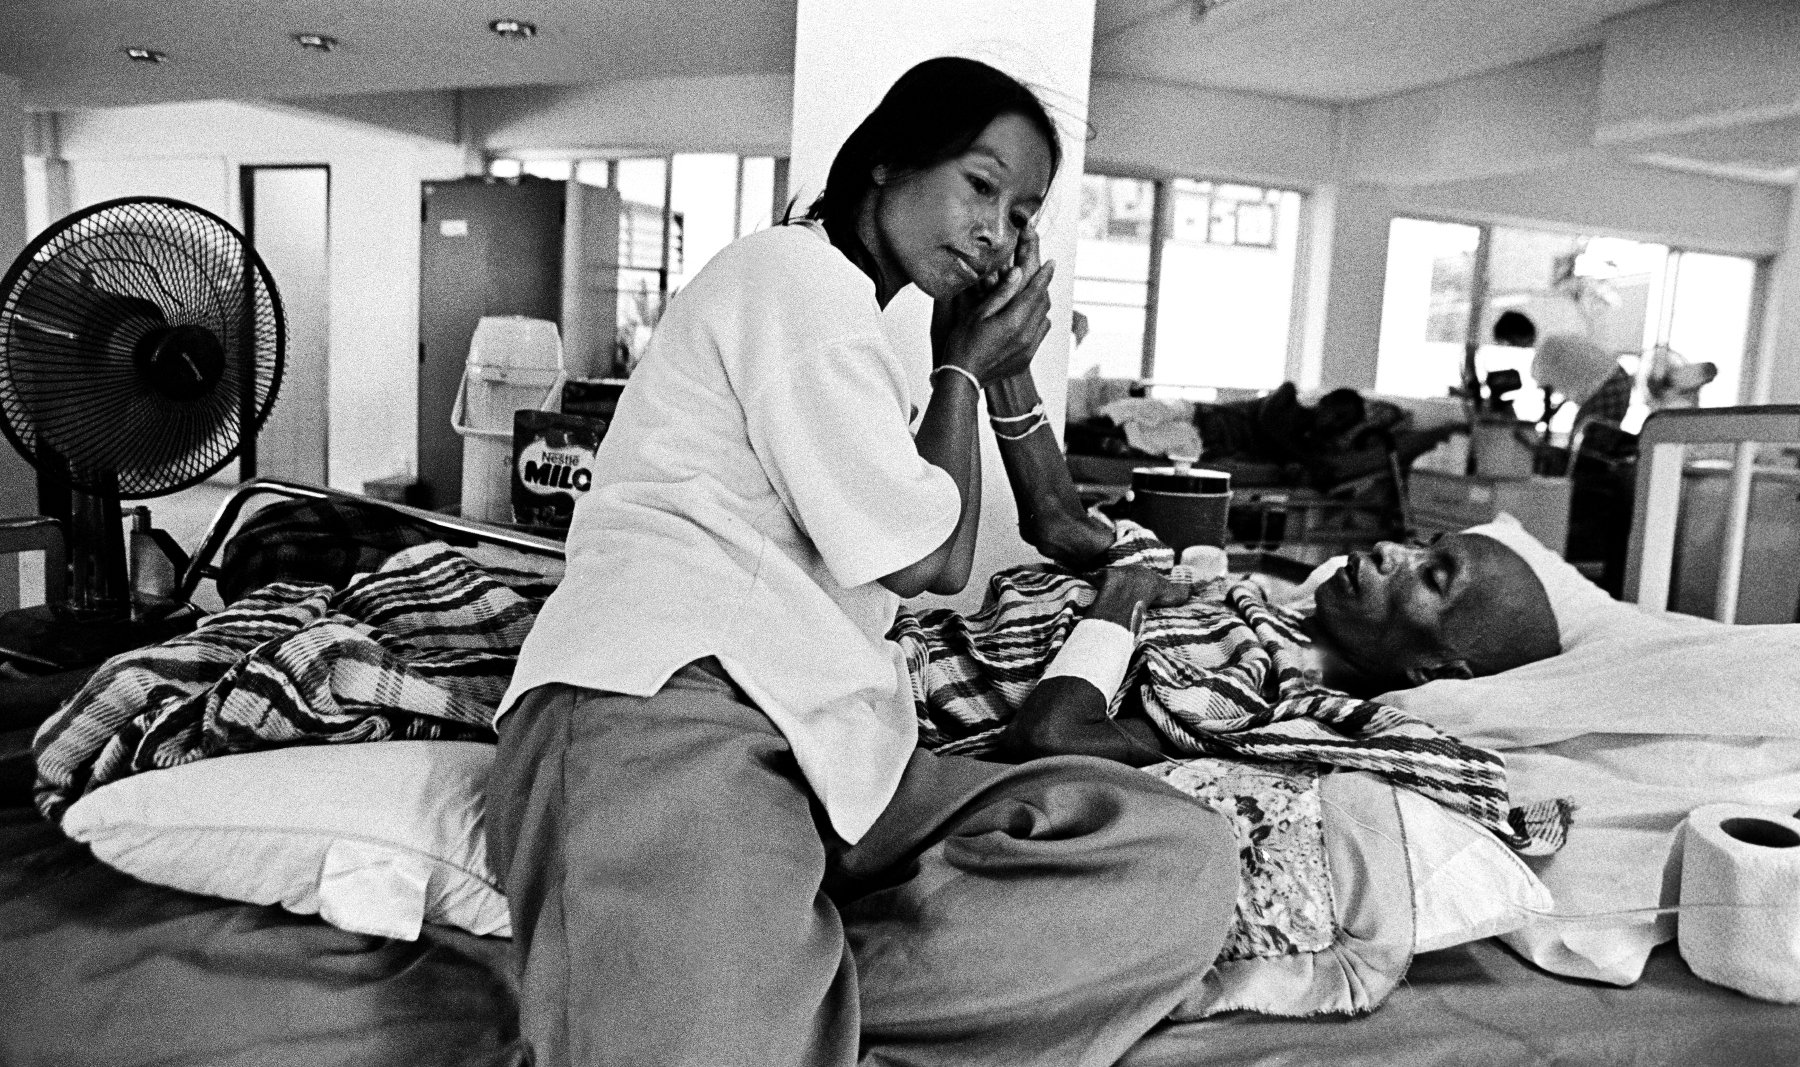  “Care” A wife cares for her husband at Wat Prabat Nampu. Wat Prabat Nampu is a Buddhist temple and a hospice for those living with HIV. Lopburi, Thailand. 2003. 